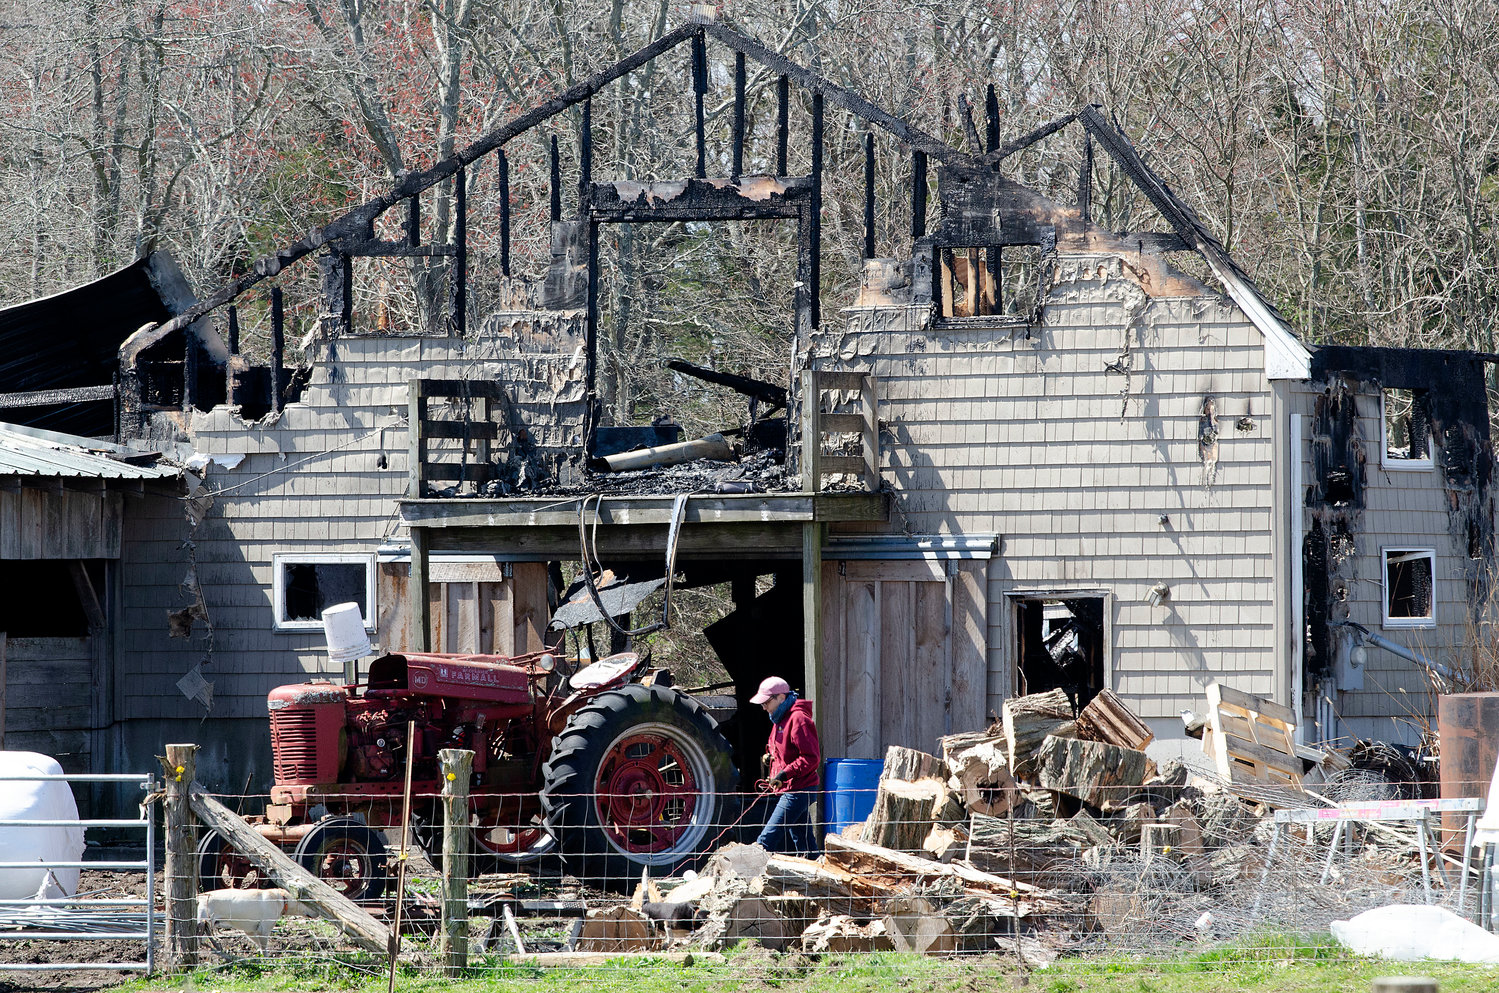 The aftermath of the Barton Avenue fire as seen on Monday morning in Touisset.